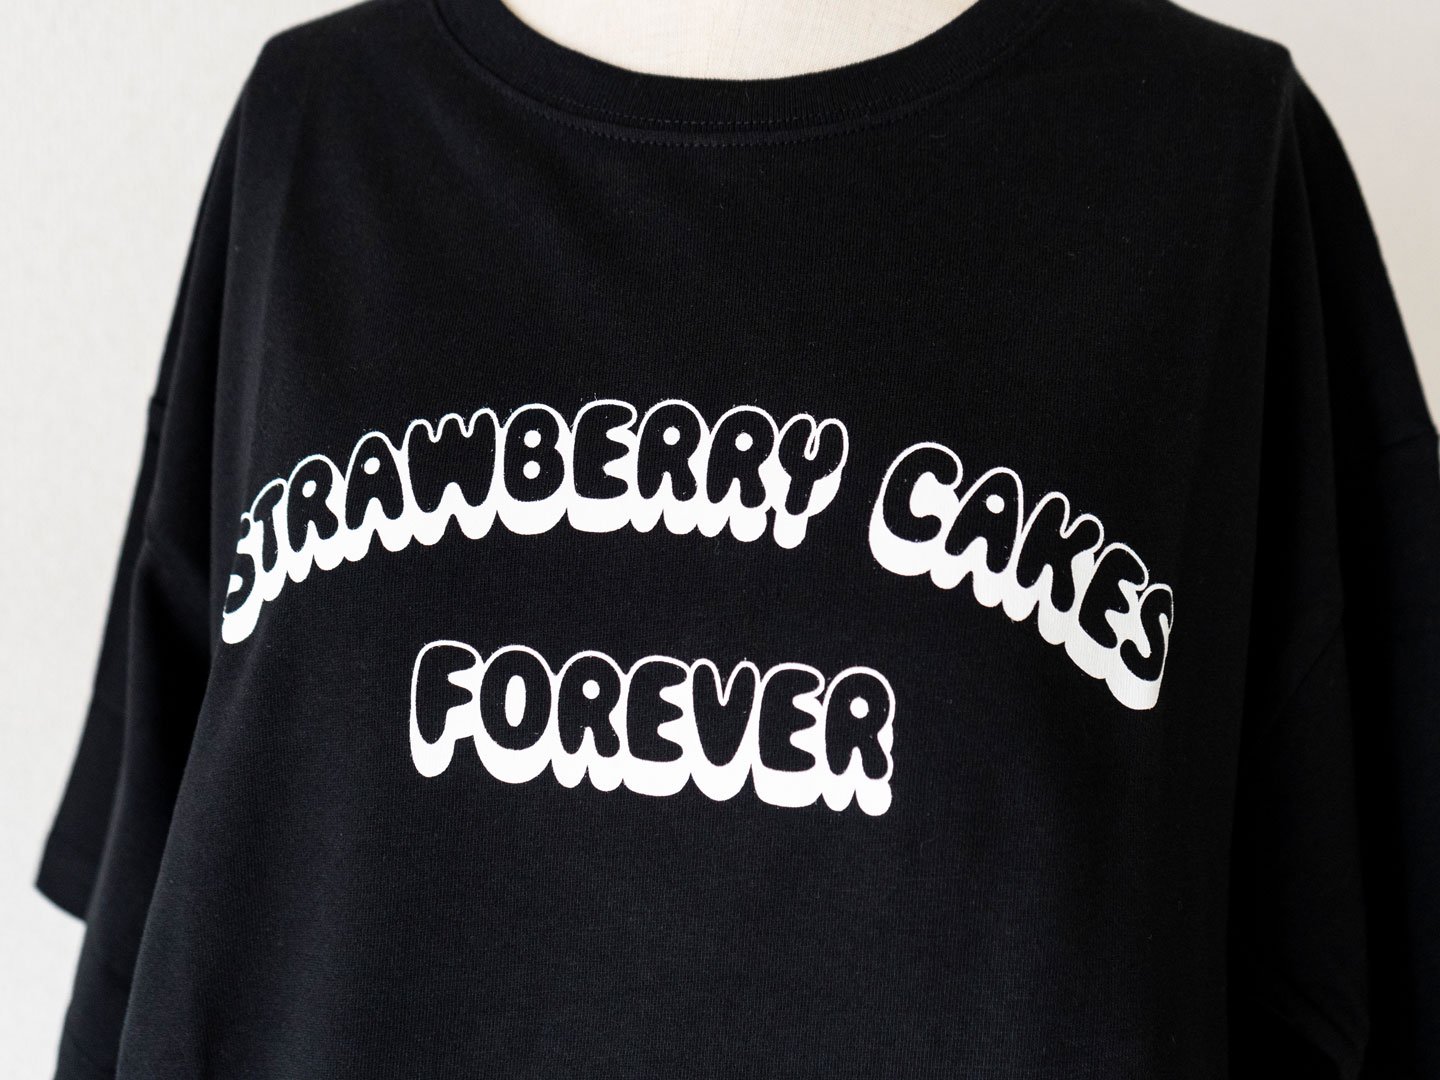 <img class='new_mark_img1' src='https://img.shop-pro.jp/img/new/icons21.gif' style='border:none;display:inline;margin:0px;padding:0px;width:auto;' />T-Shirt「STRAWBERRY CAKES FOREVER」黒